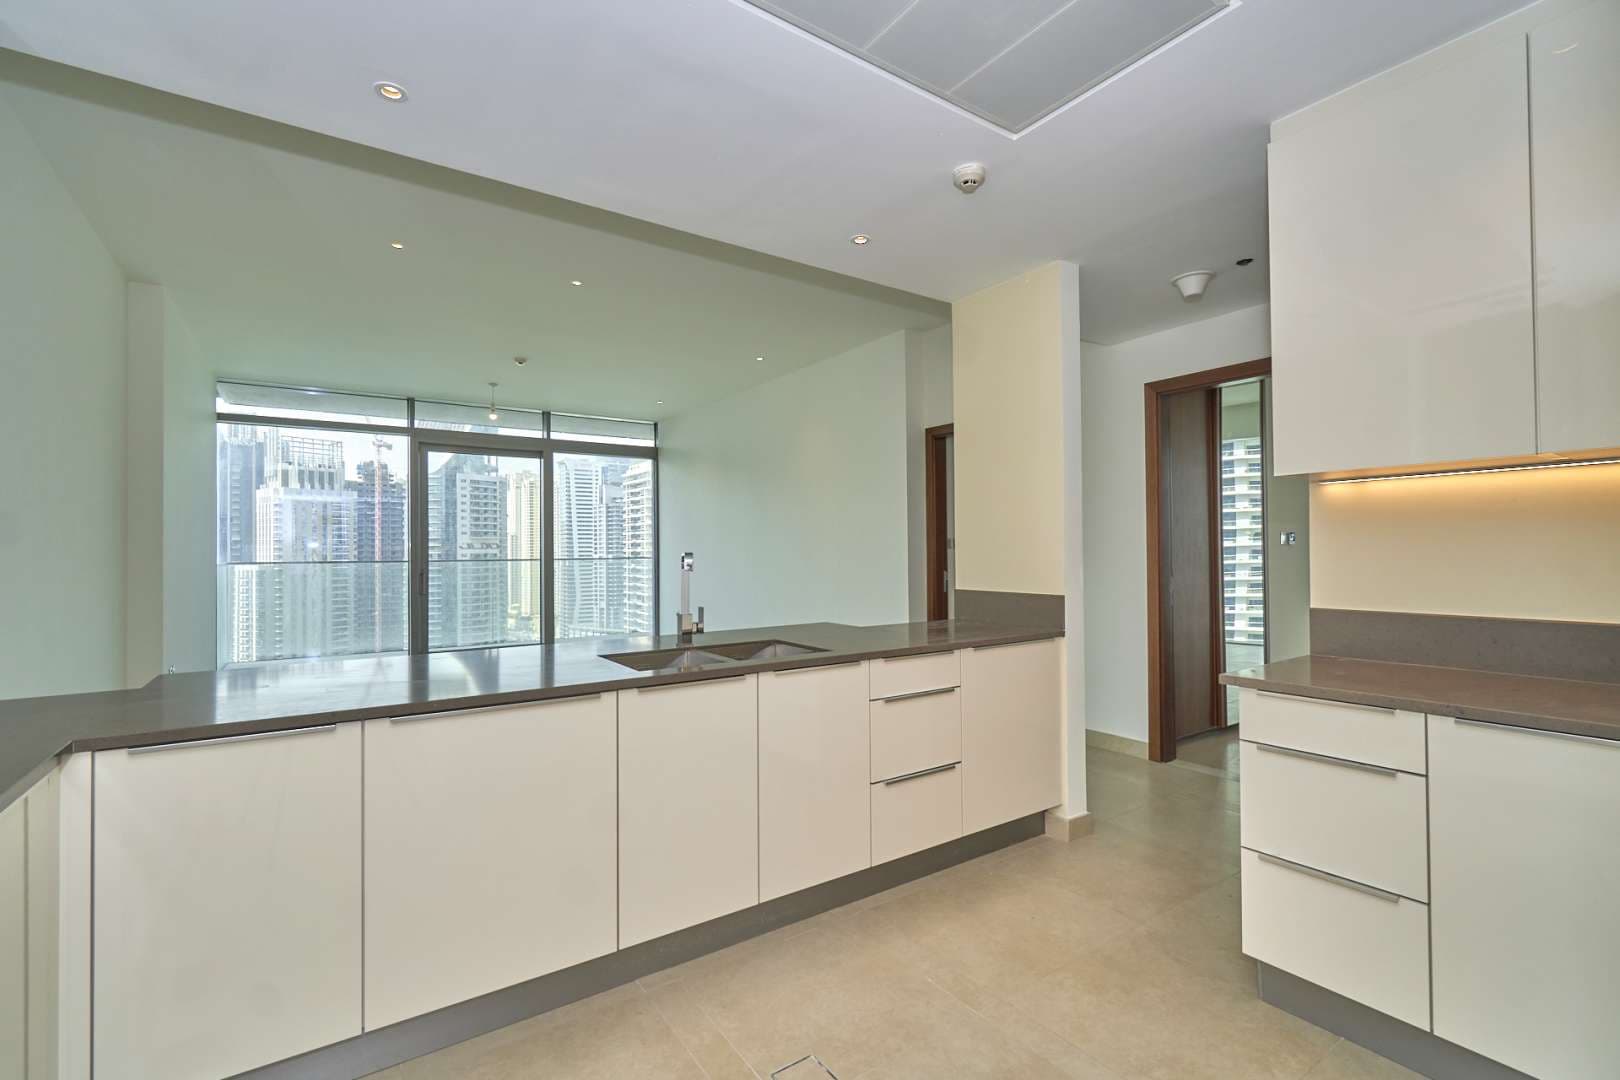 3 Bedroom Apartment For Sale Marina Gate Lp08685 2c3a20ad6a805200.jpg